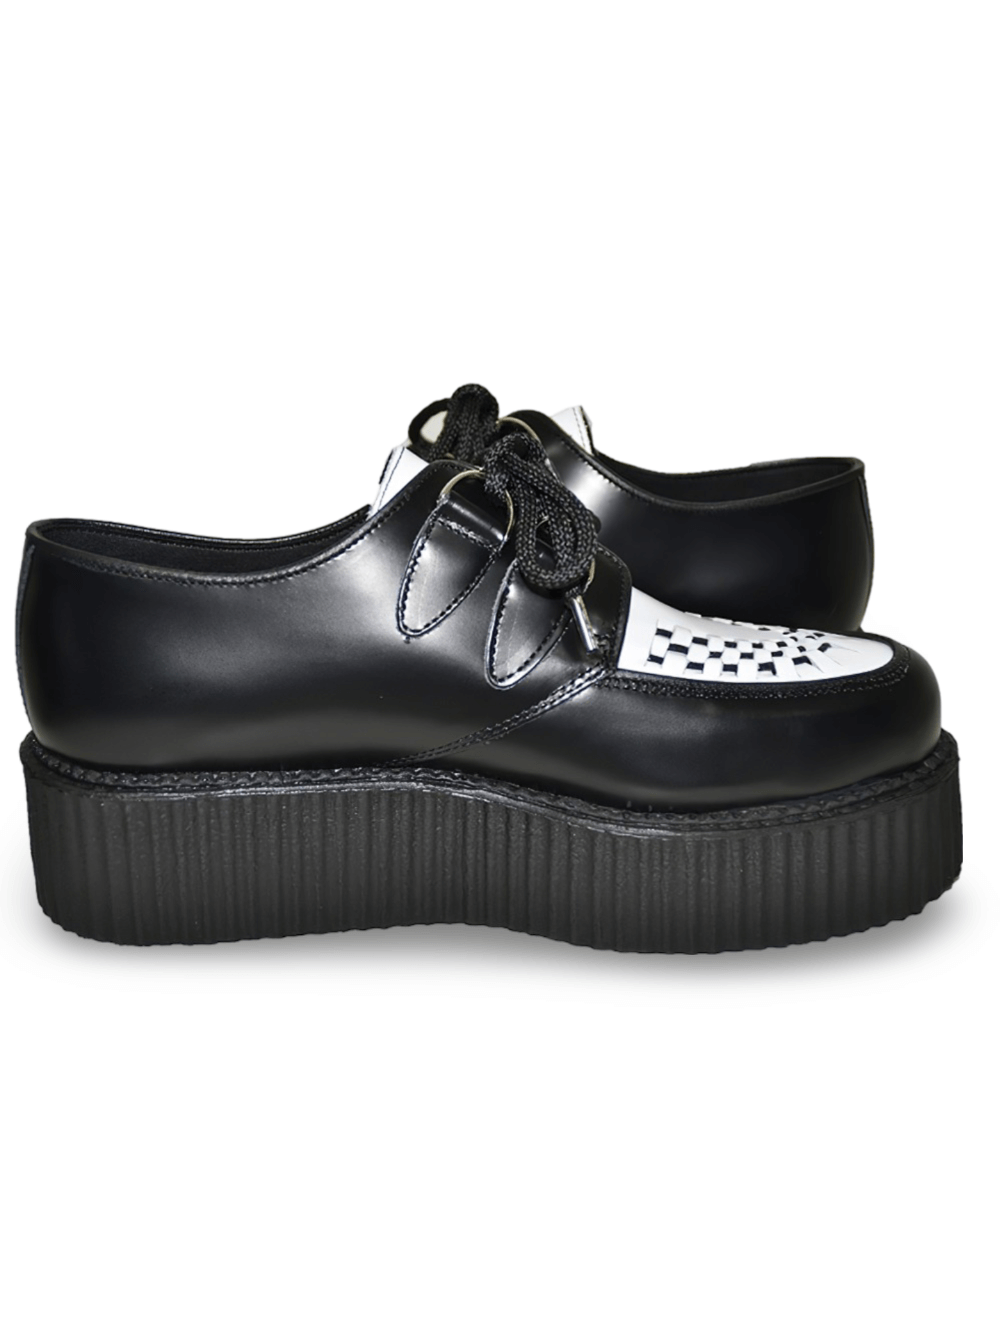 White And Black Creepers with Double Sole And Lace-Up